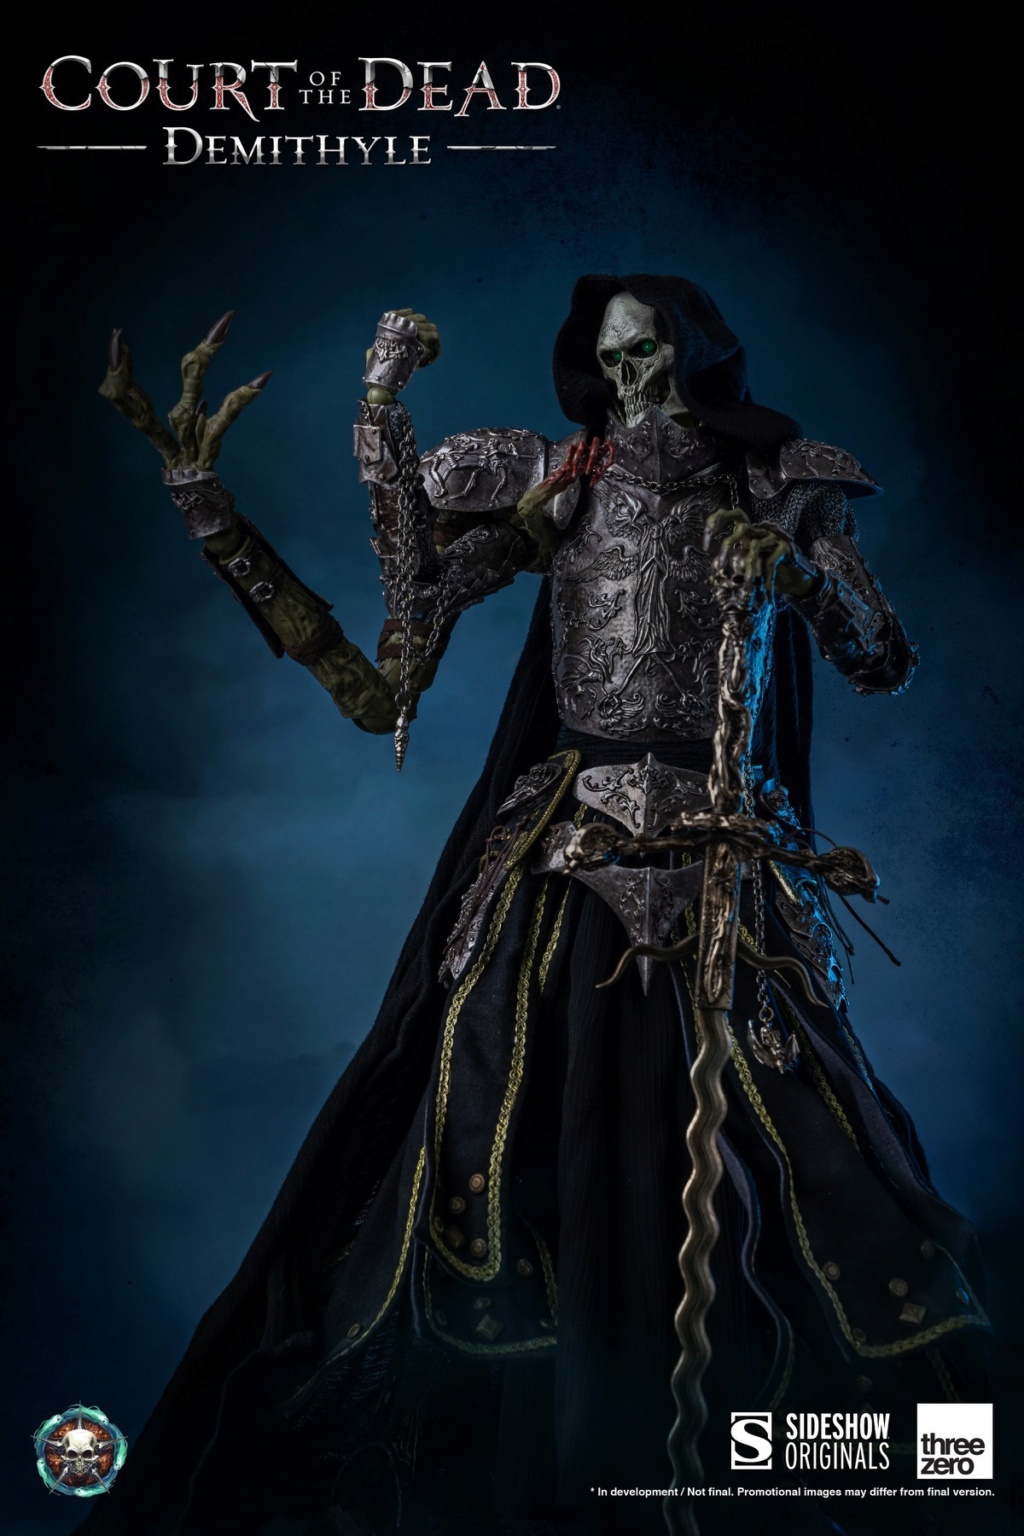 NEW PRODUCT: Threezero & Sideshow: 1/6 "Court of the Dead" - Demithyle Action Figure 09322010